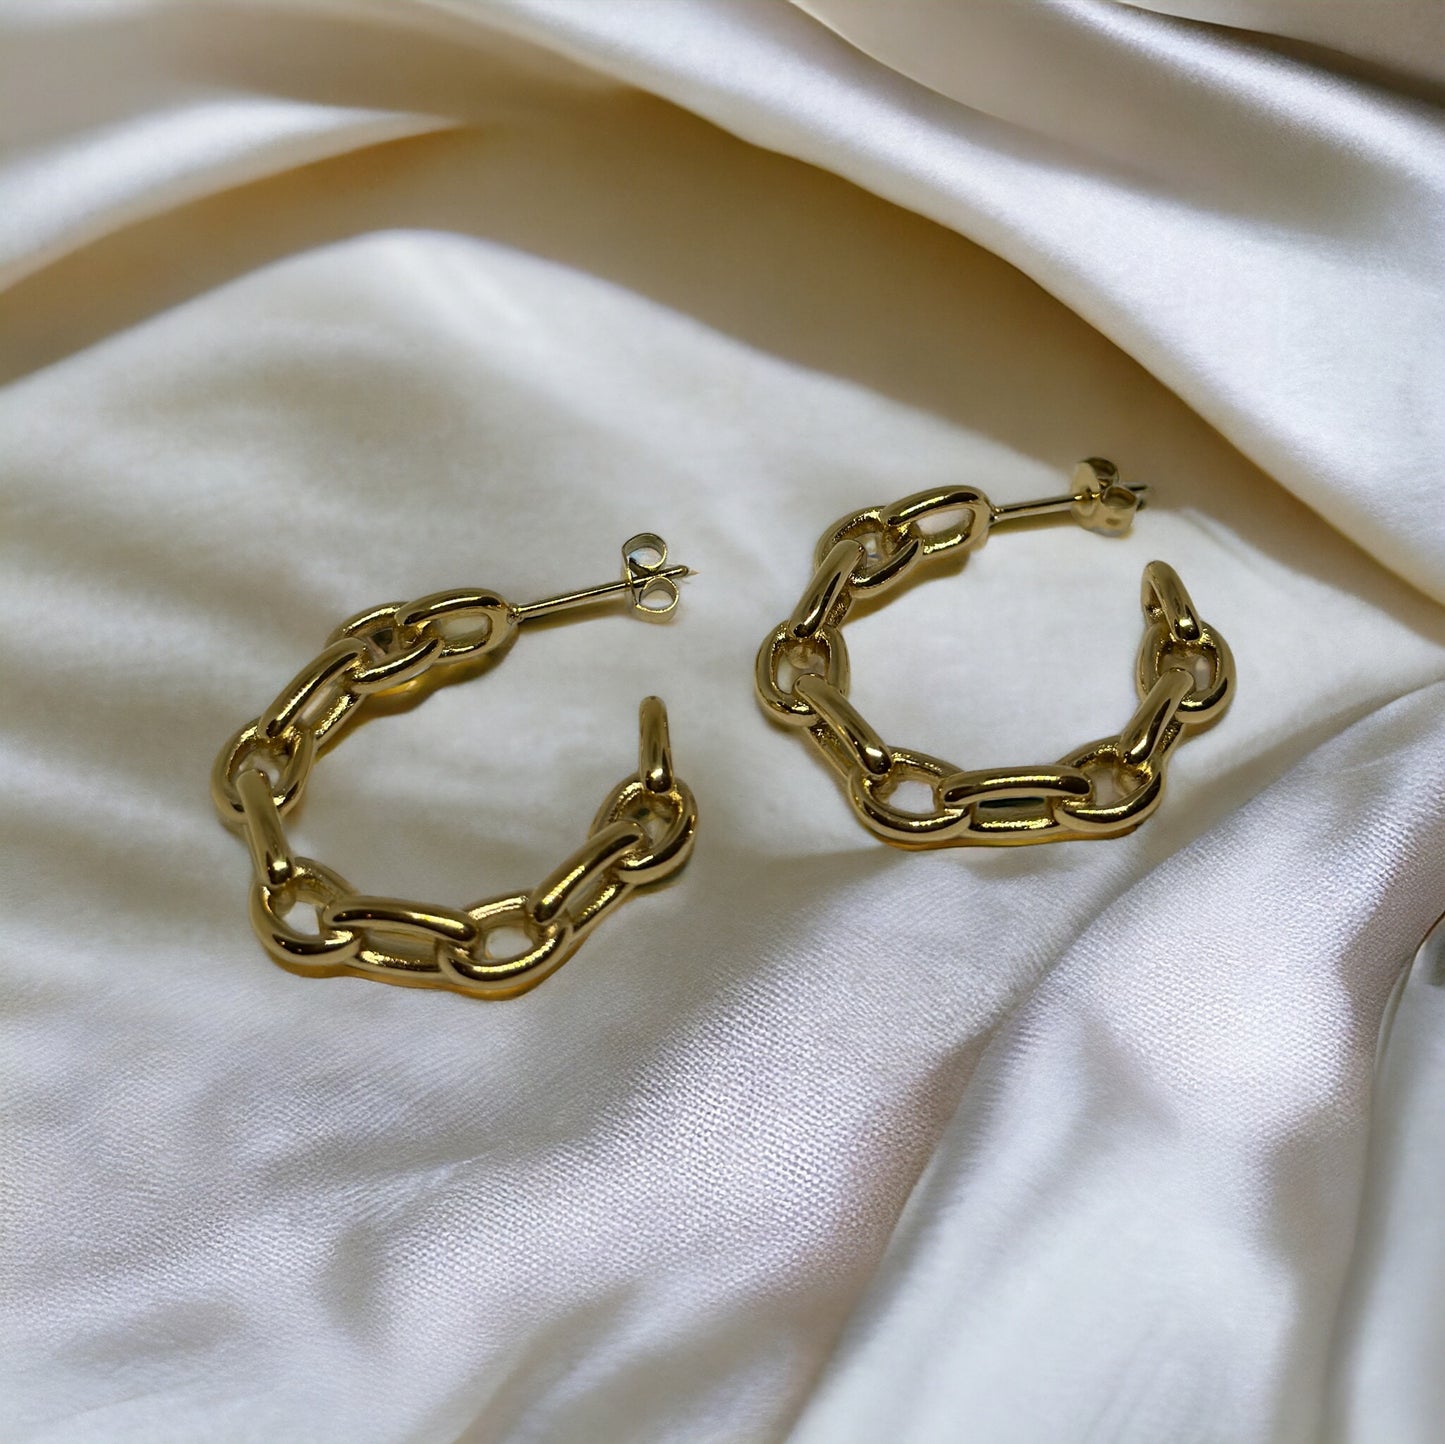 Audrey Chain Hoops